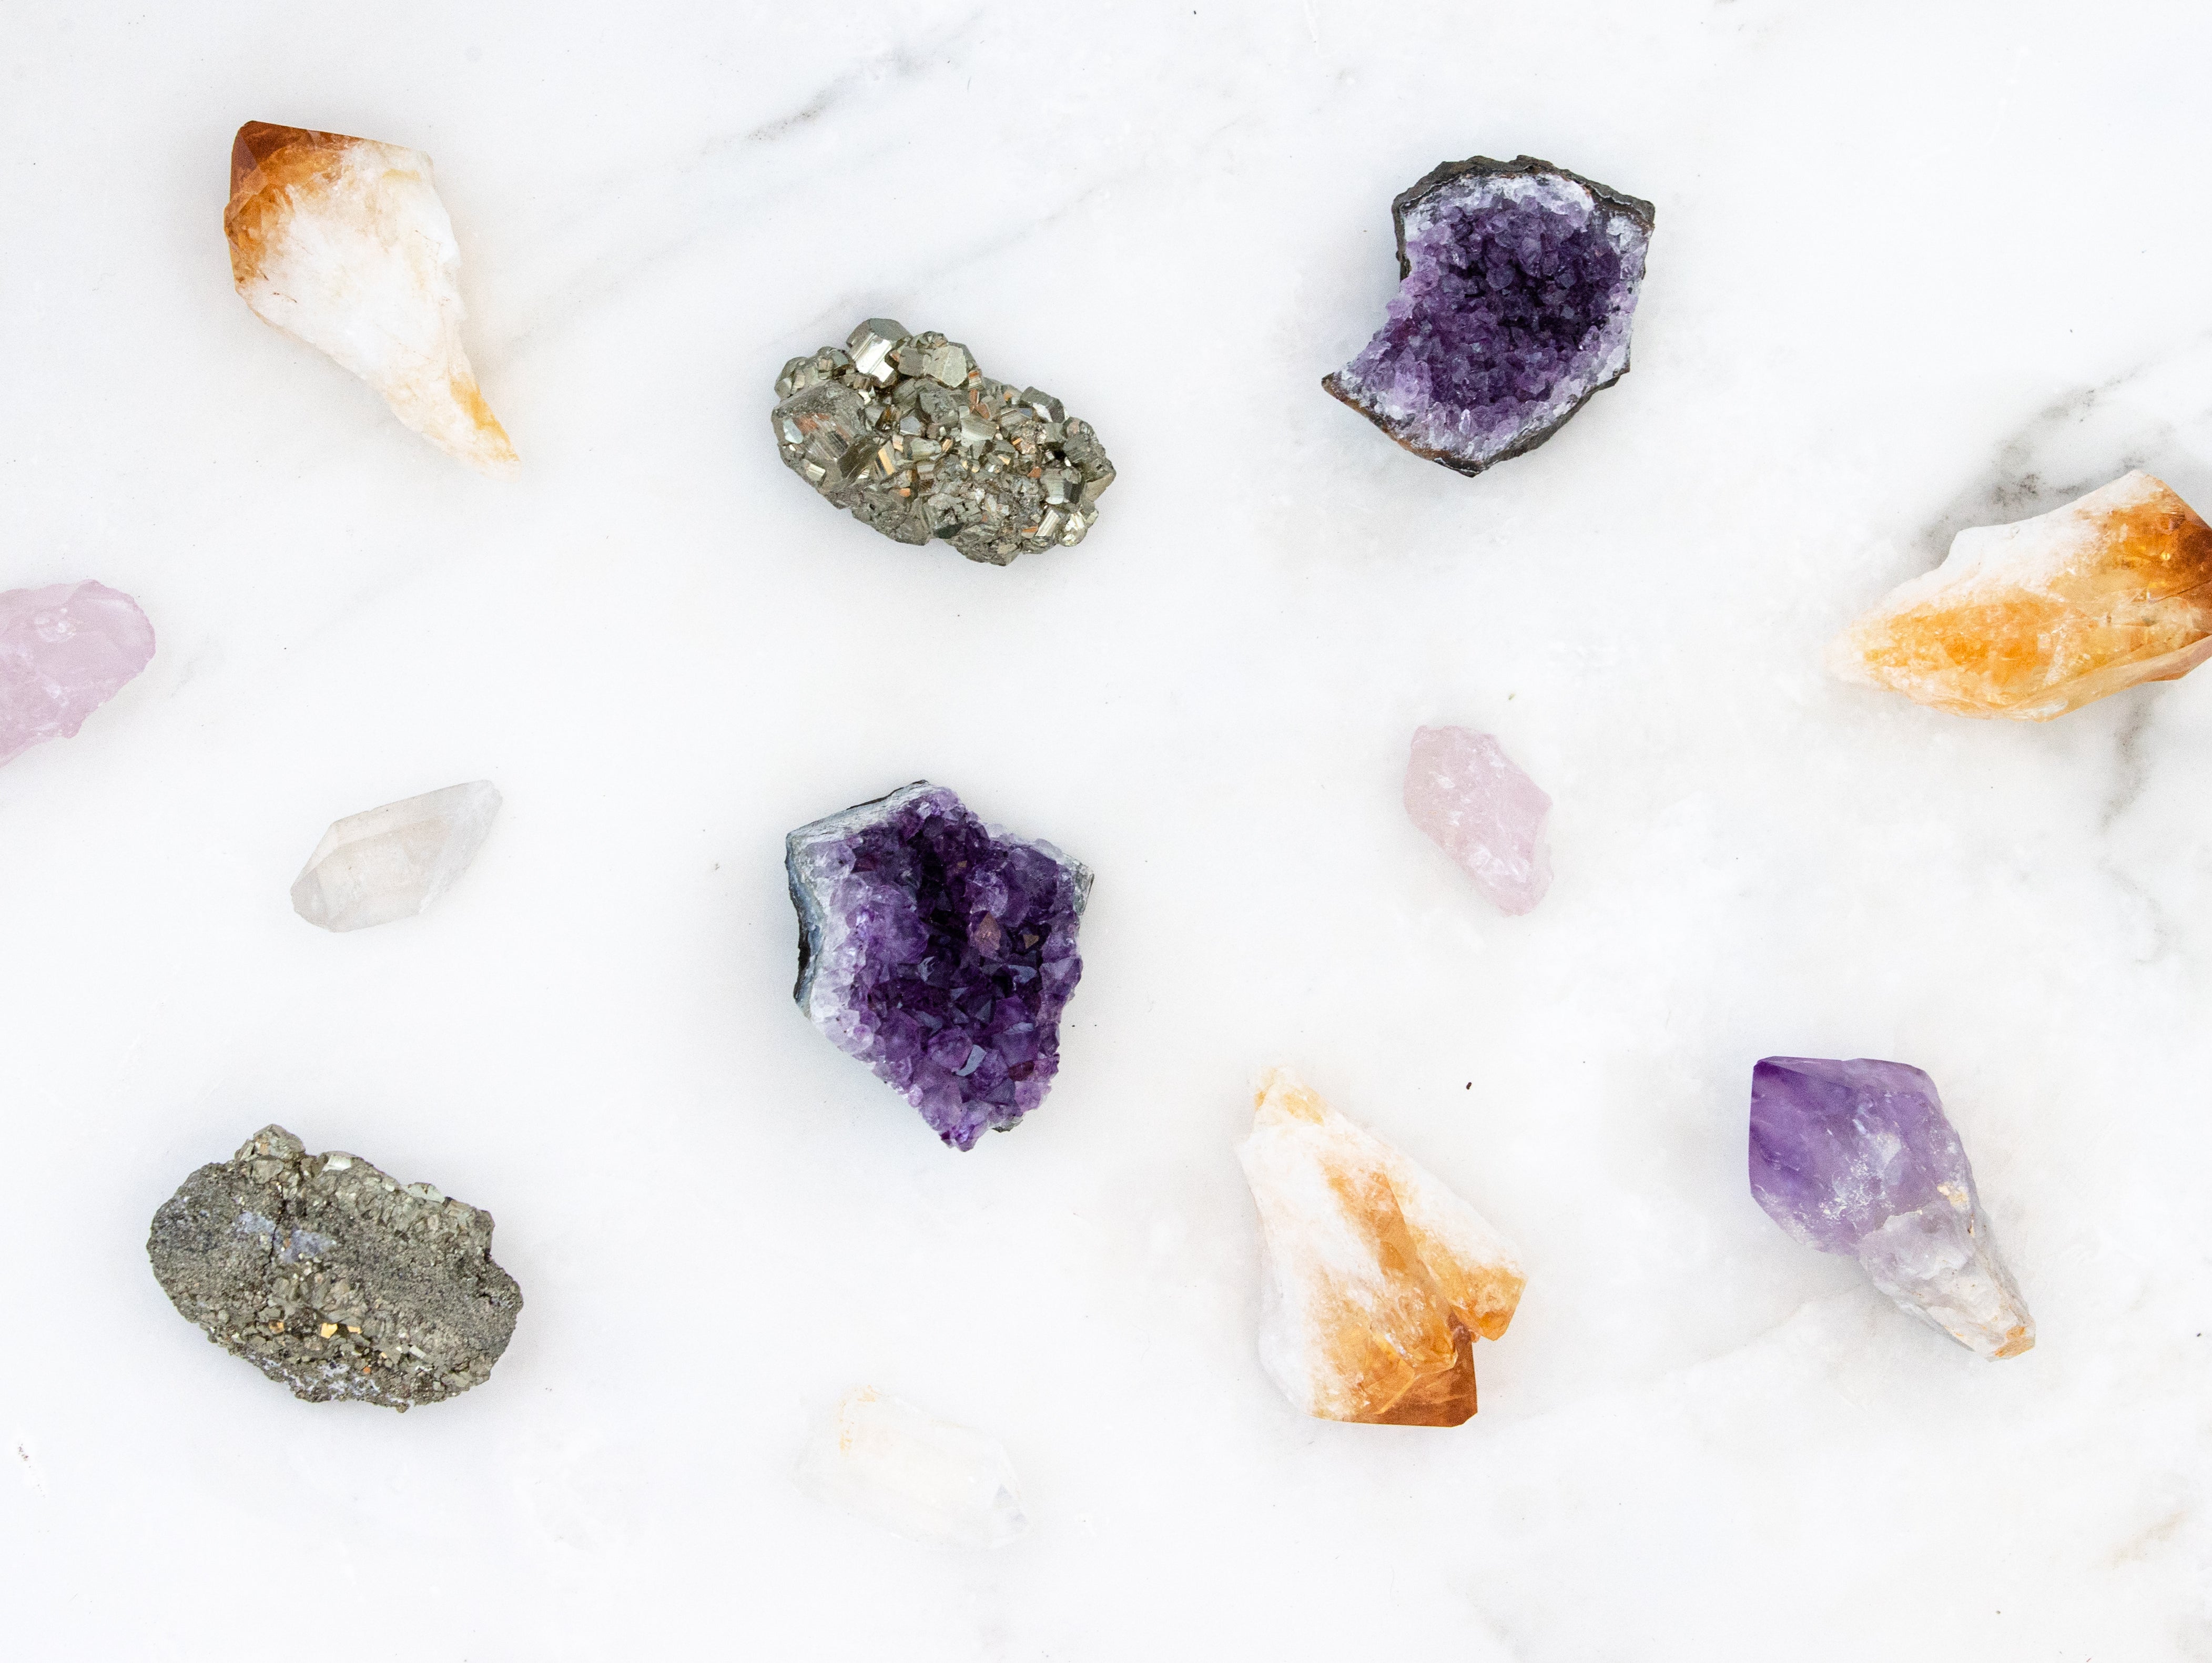 The Beginner's Guide to All Things Crystals